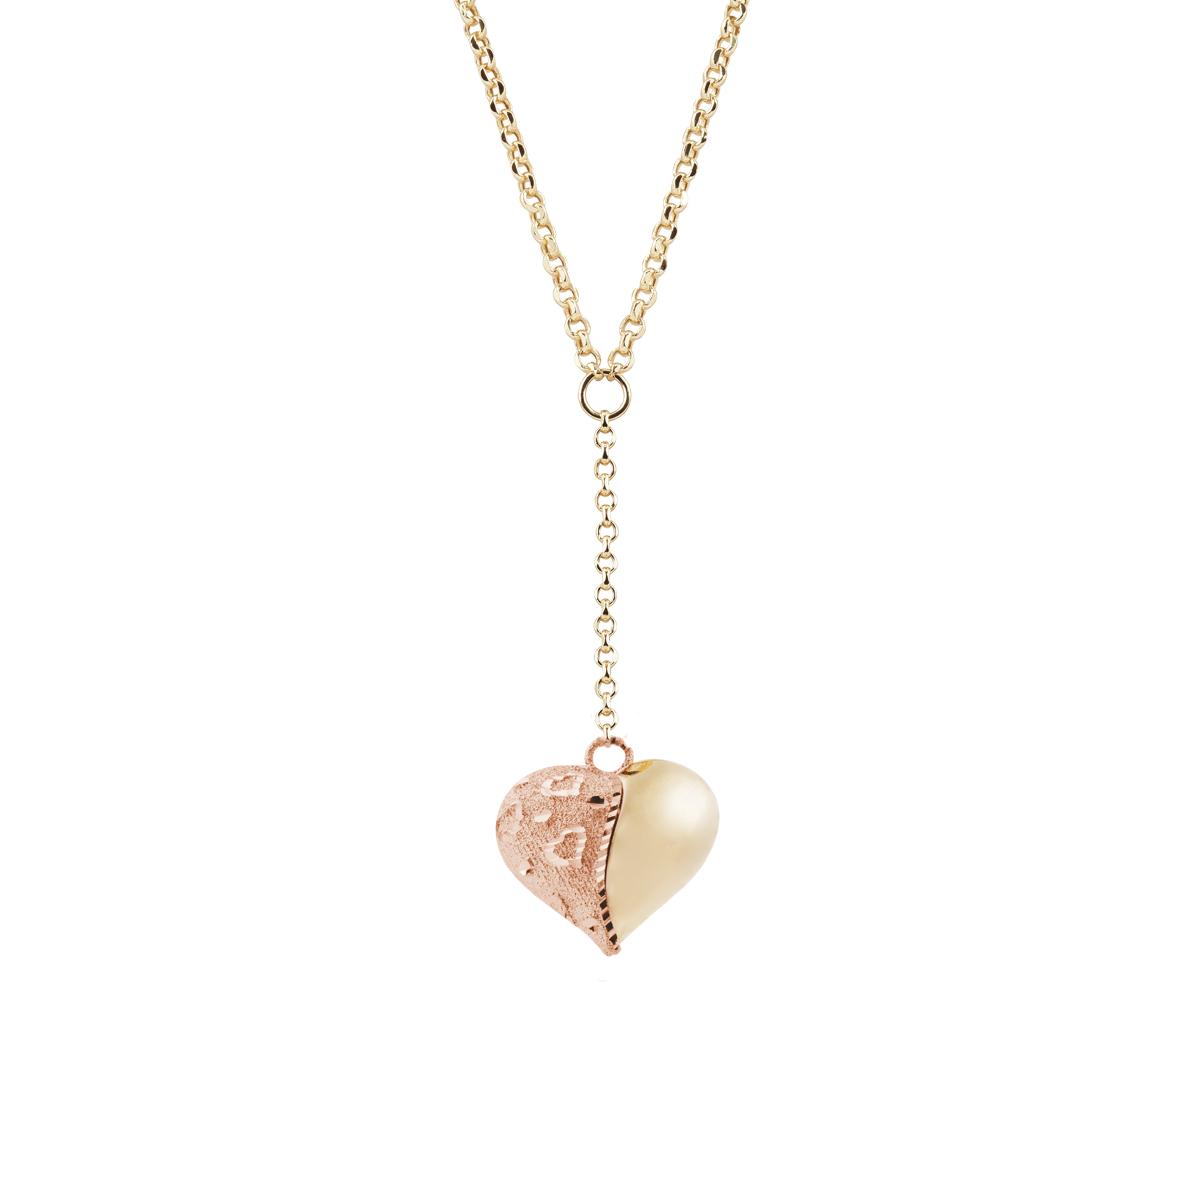 Ipsilon necklace with polished and satin-finished pendant heart in 18kt gold - CEA2076